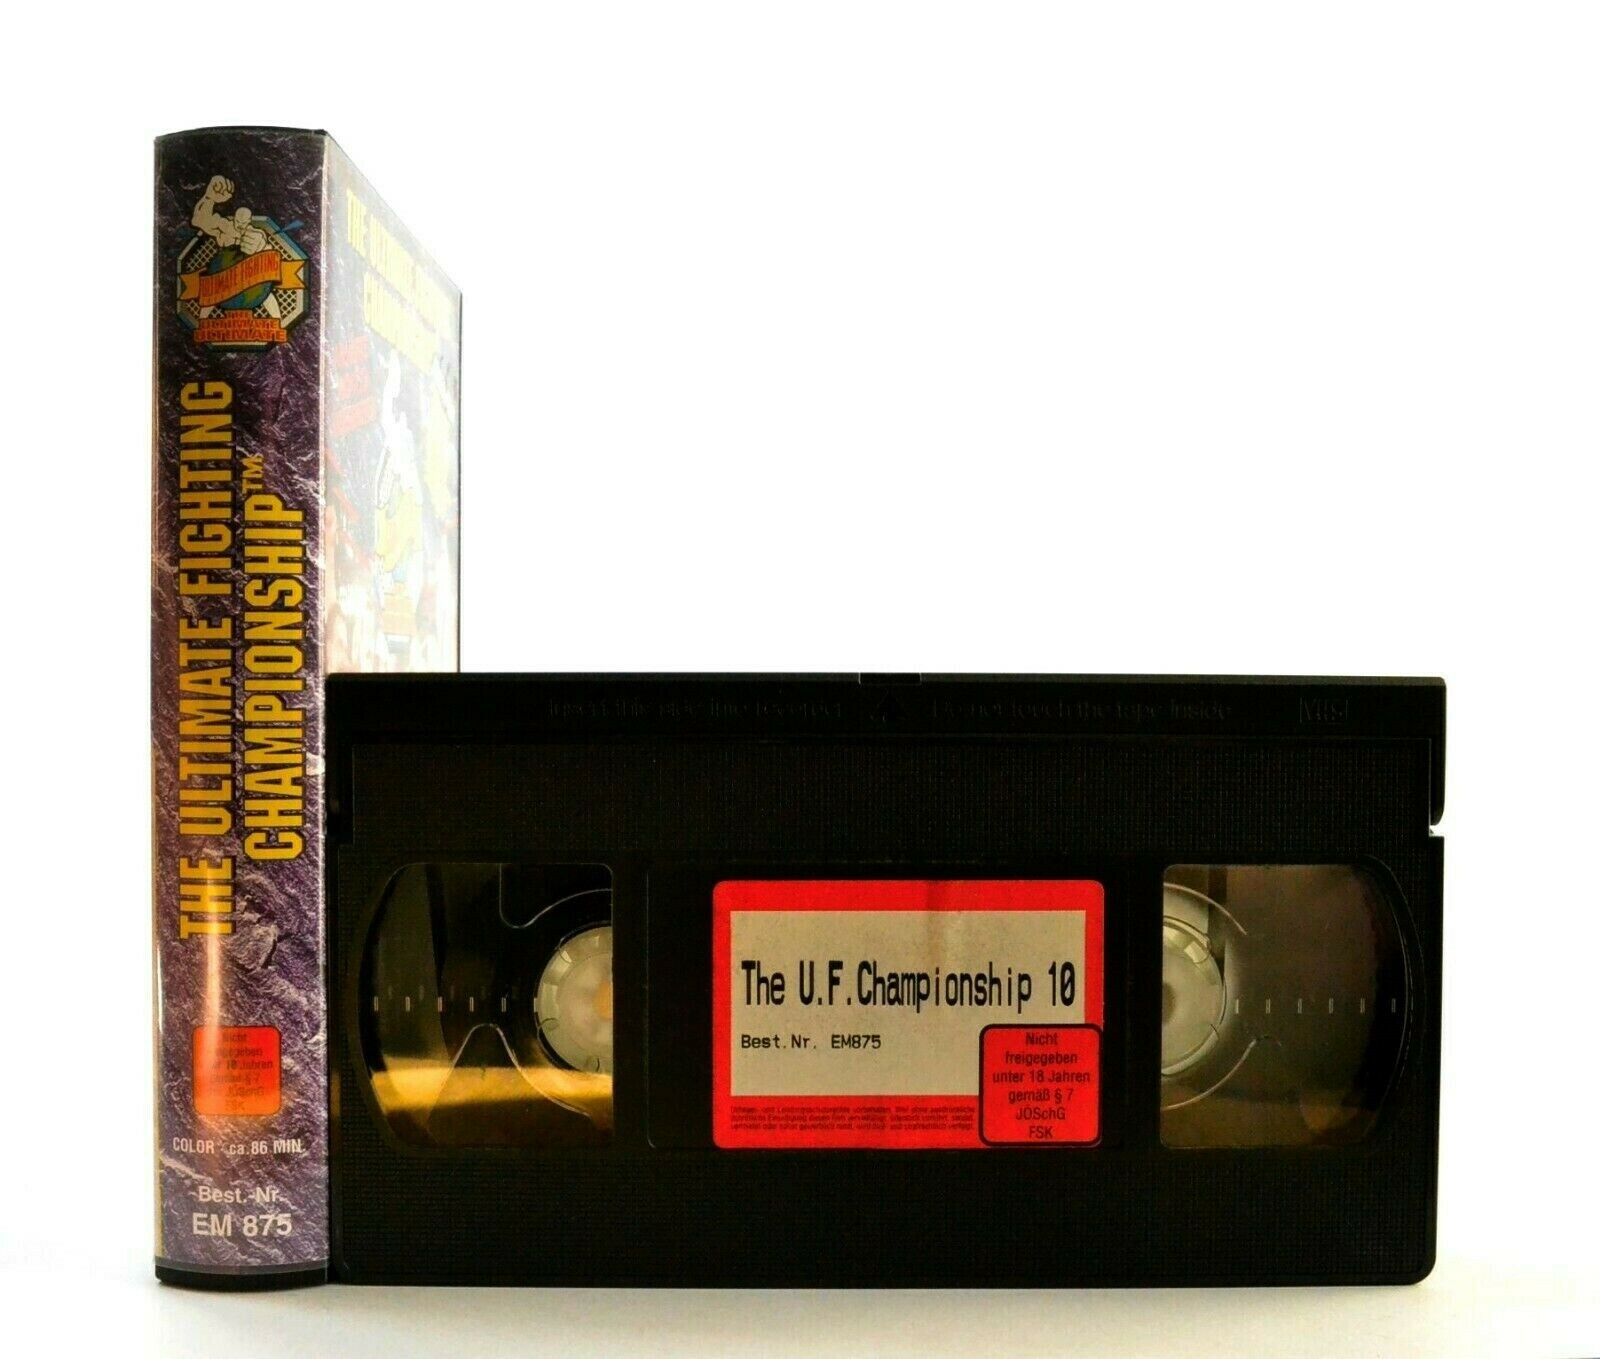 The Ultimate Fighting Championship - Martial Arts - Paul Varelans - Pal VHS-